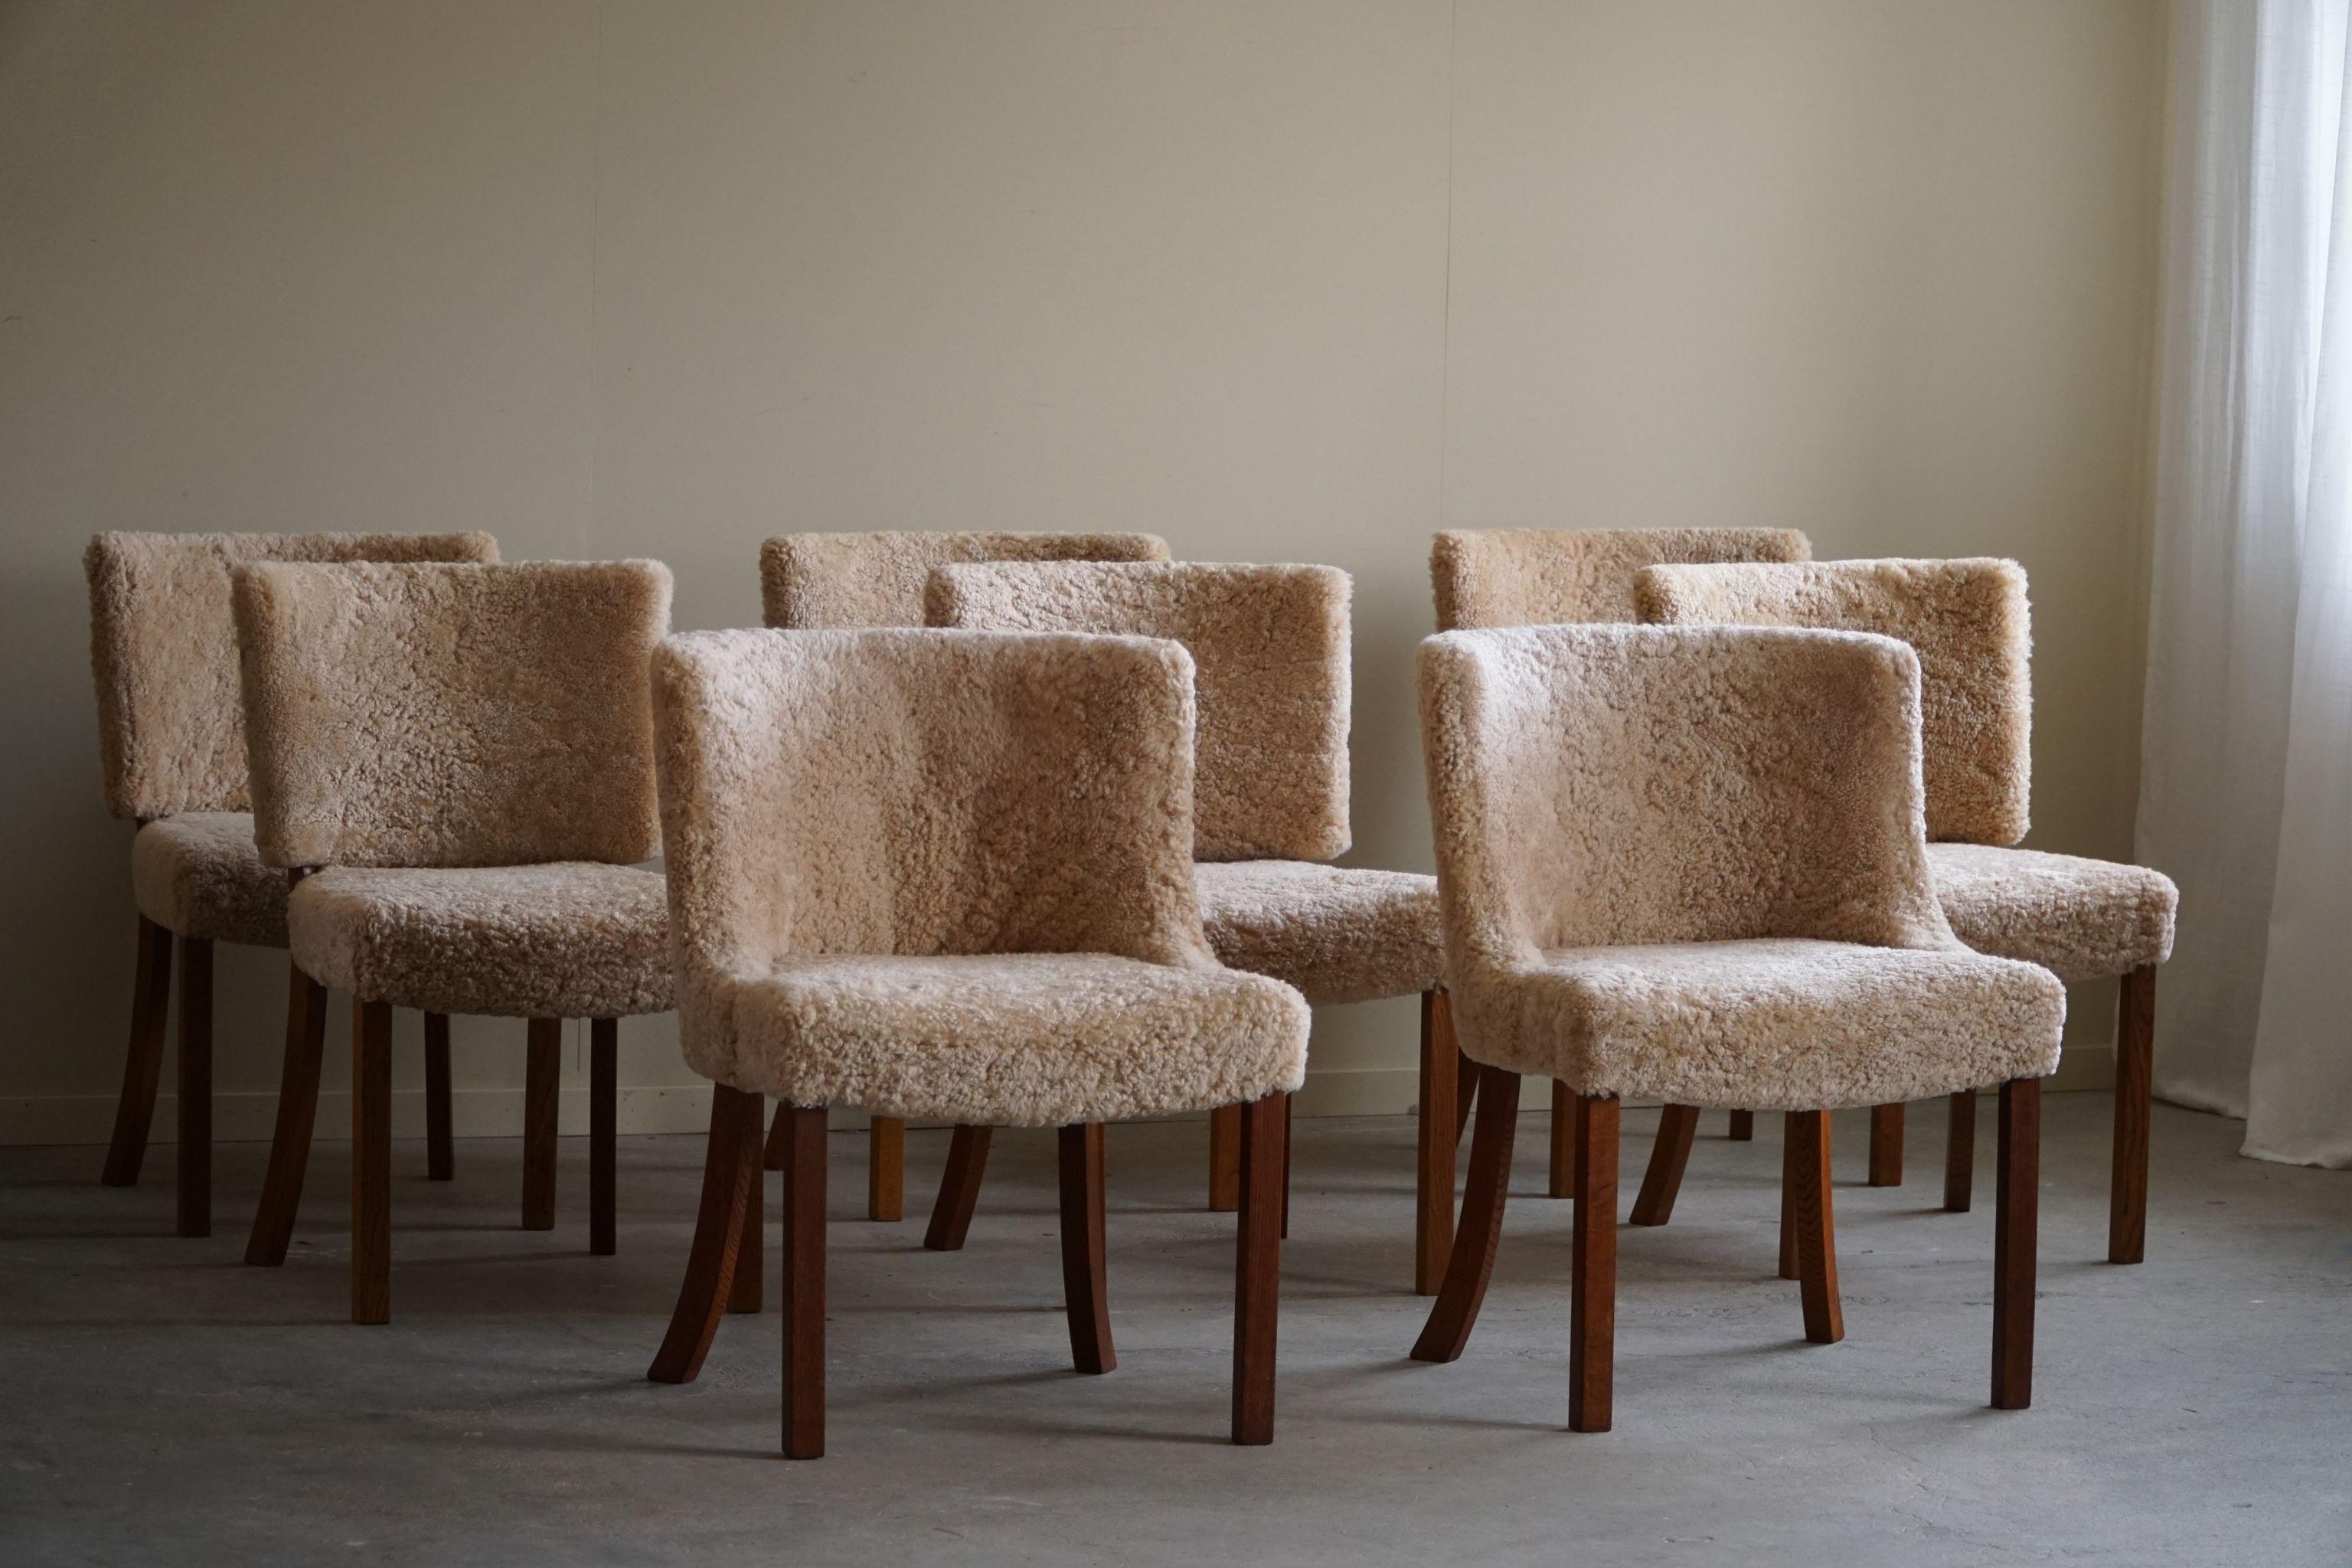 A rare pair of classic dining chairs / desk chairs, attributed to Kaj Gottlob for Fritz Hansen. Made in the 1940 - 1950s. Newly reupholstered in a great quality shearling lambswool, elegant shaped legs made in solid oak. The general impression is